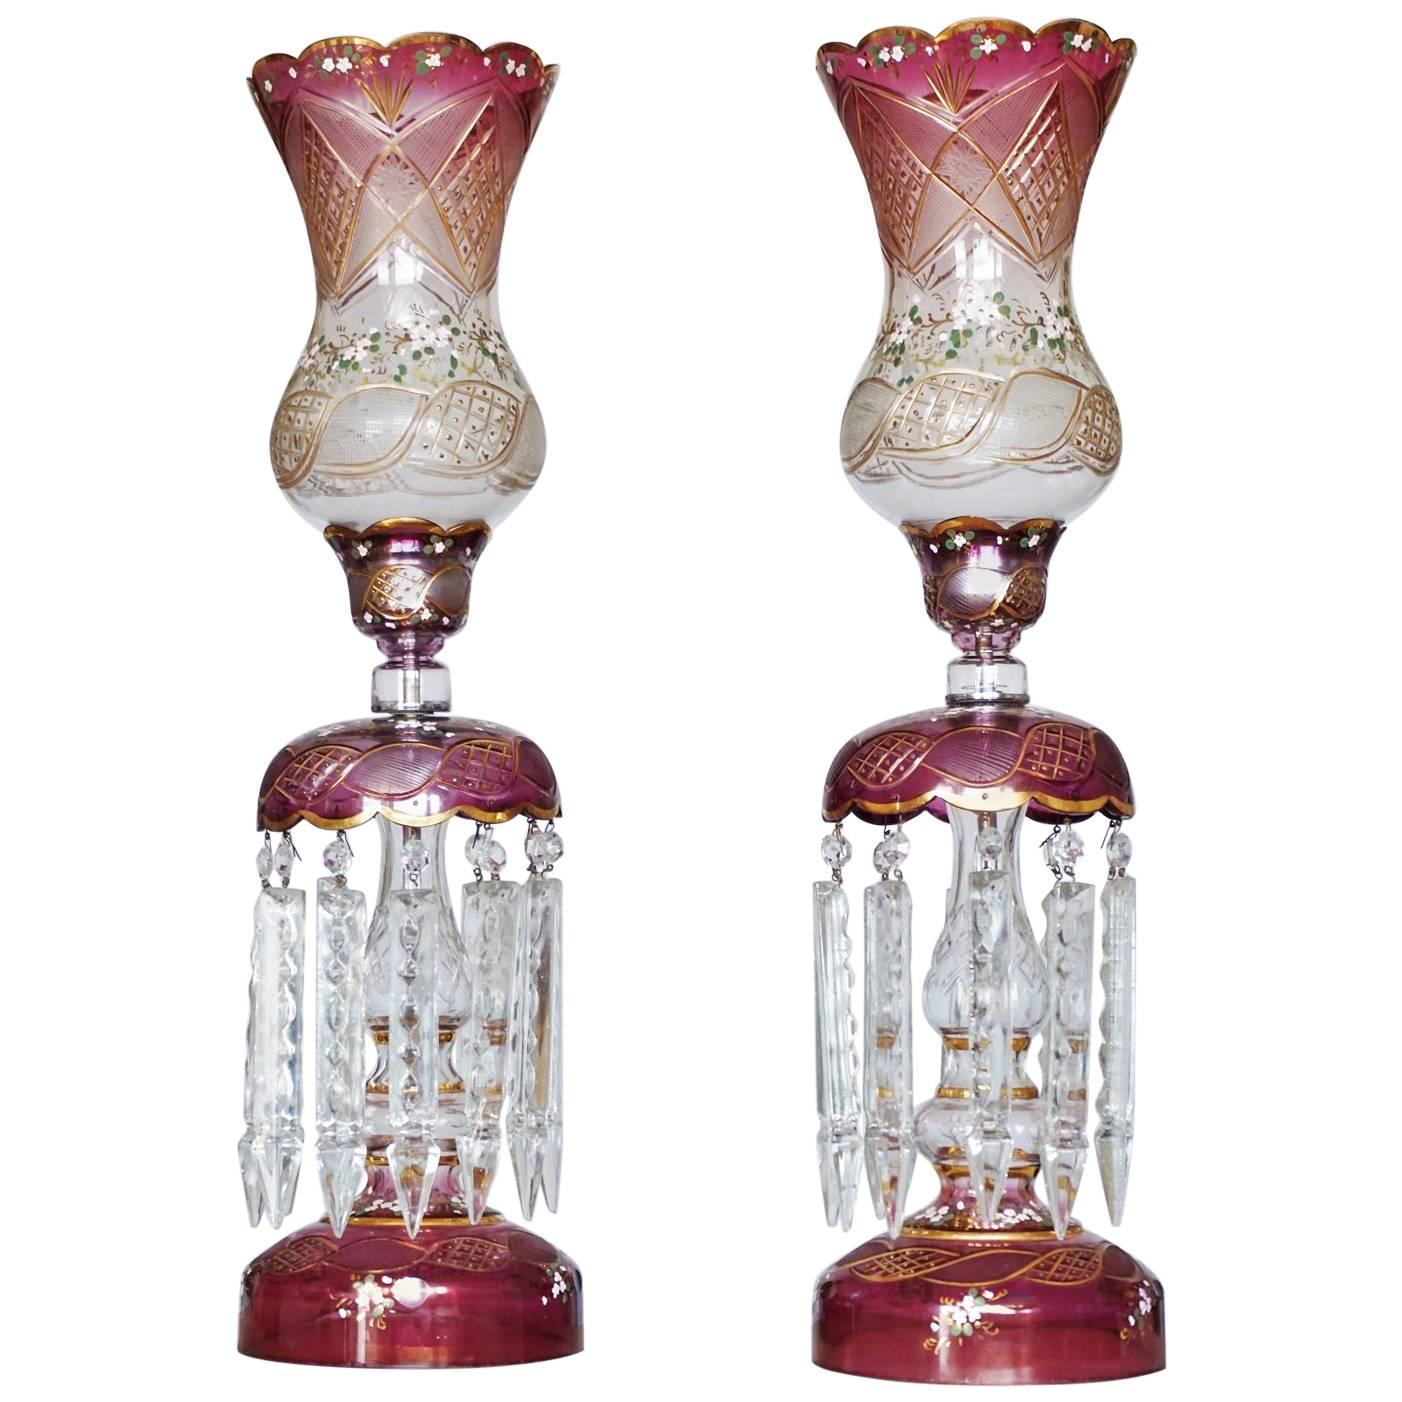 Pair of large Bohemian cranberry hand-painted cut glass lusters, table lamps with long cut glass prisms, circa 1920.

One light socket.

The lusters have been rewired - new electric cable

Measures: Height: 26 ¾ in (68 cm) 
Diameter: 7 in (18